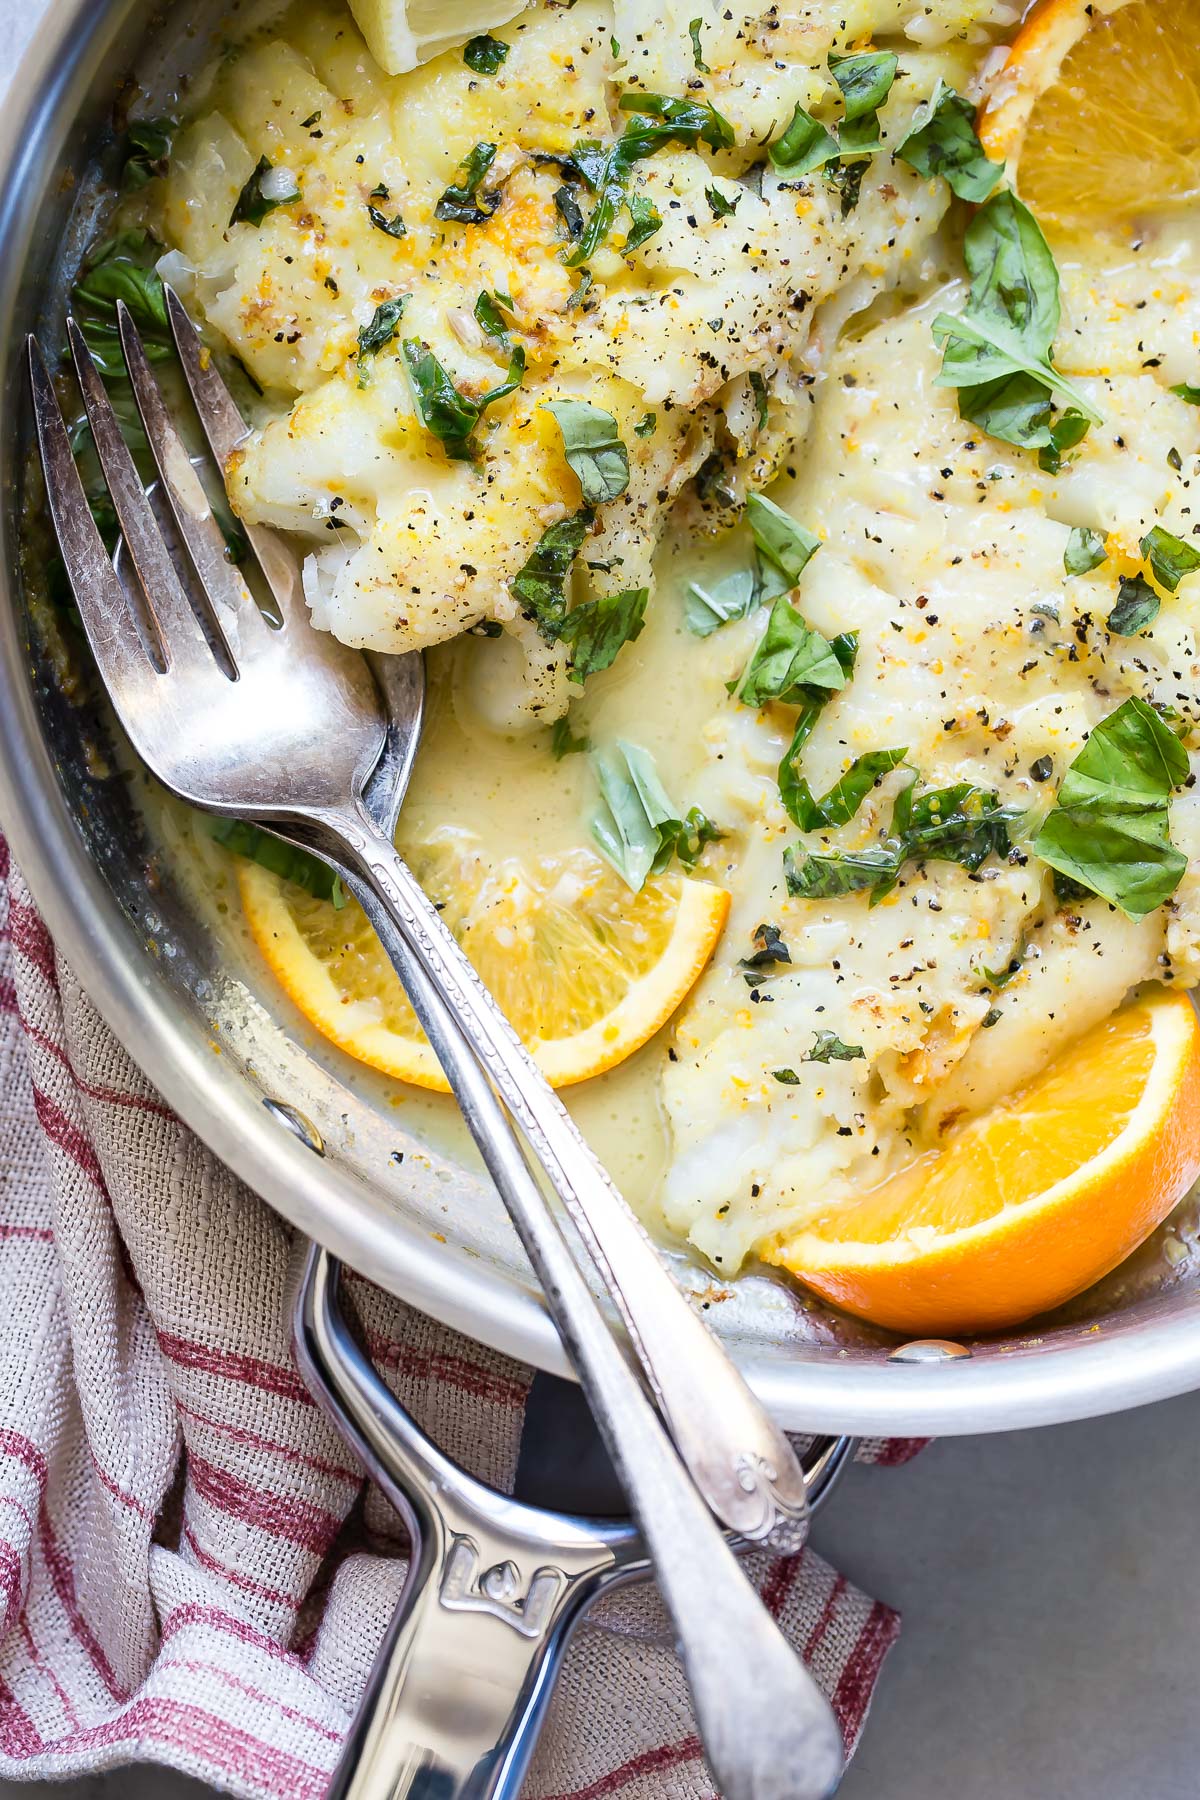 Cool Mom Eats weekly meal plan: Citrus Cod at Foodness Gracious